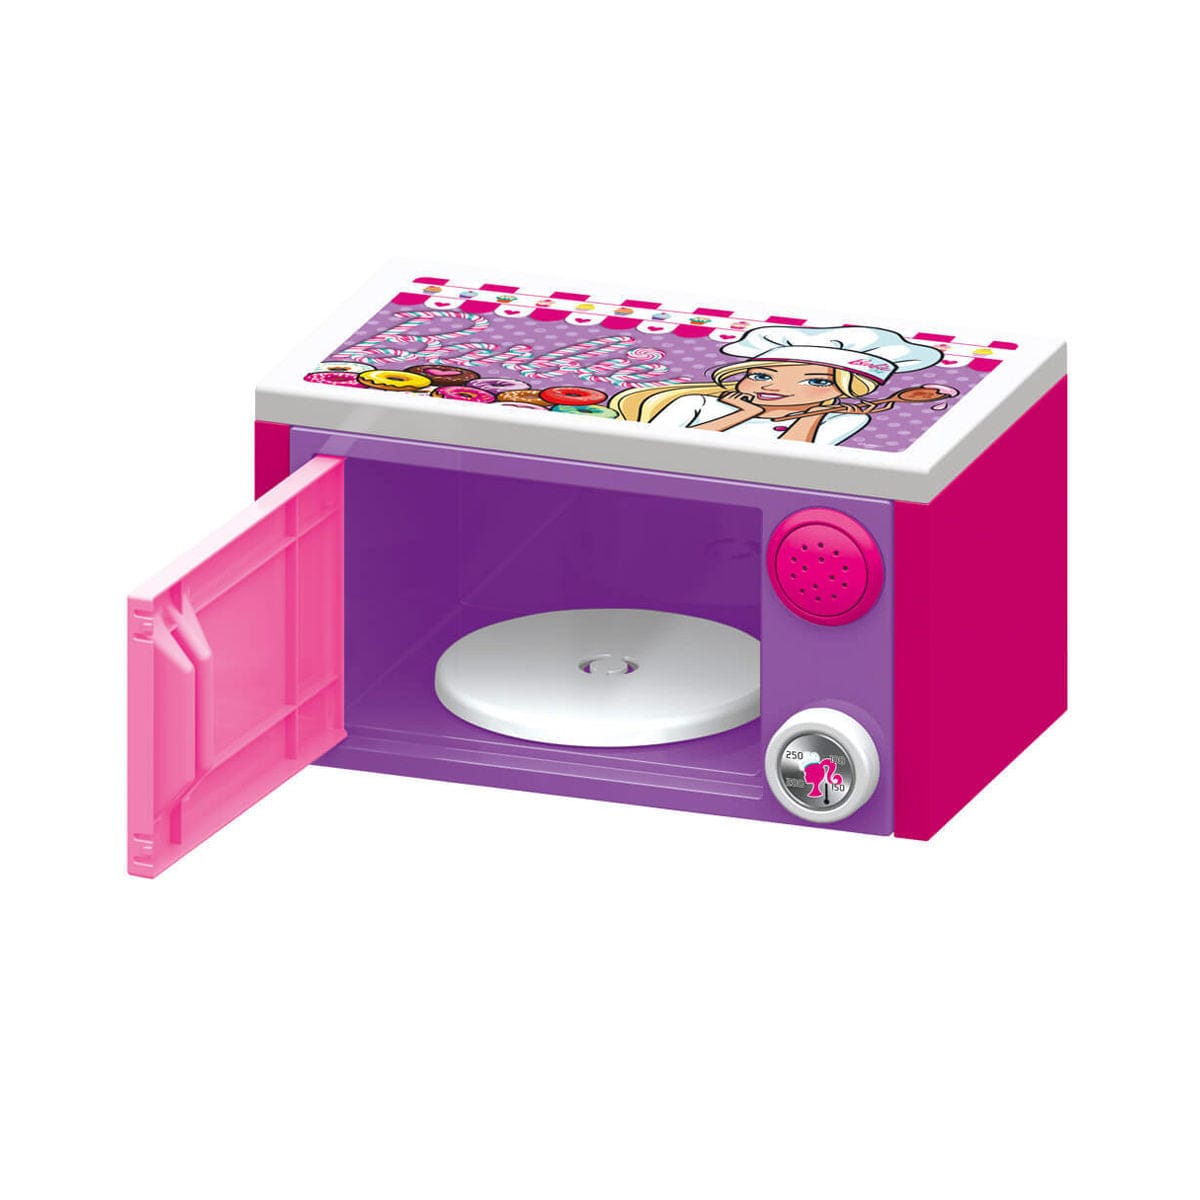 MATTEL Barbie Microwave: urn the clicking temperature knob at the bottom of the microwave and press the button for electronic sounds - 1615